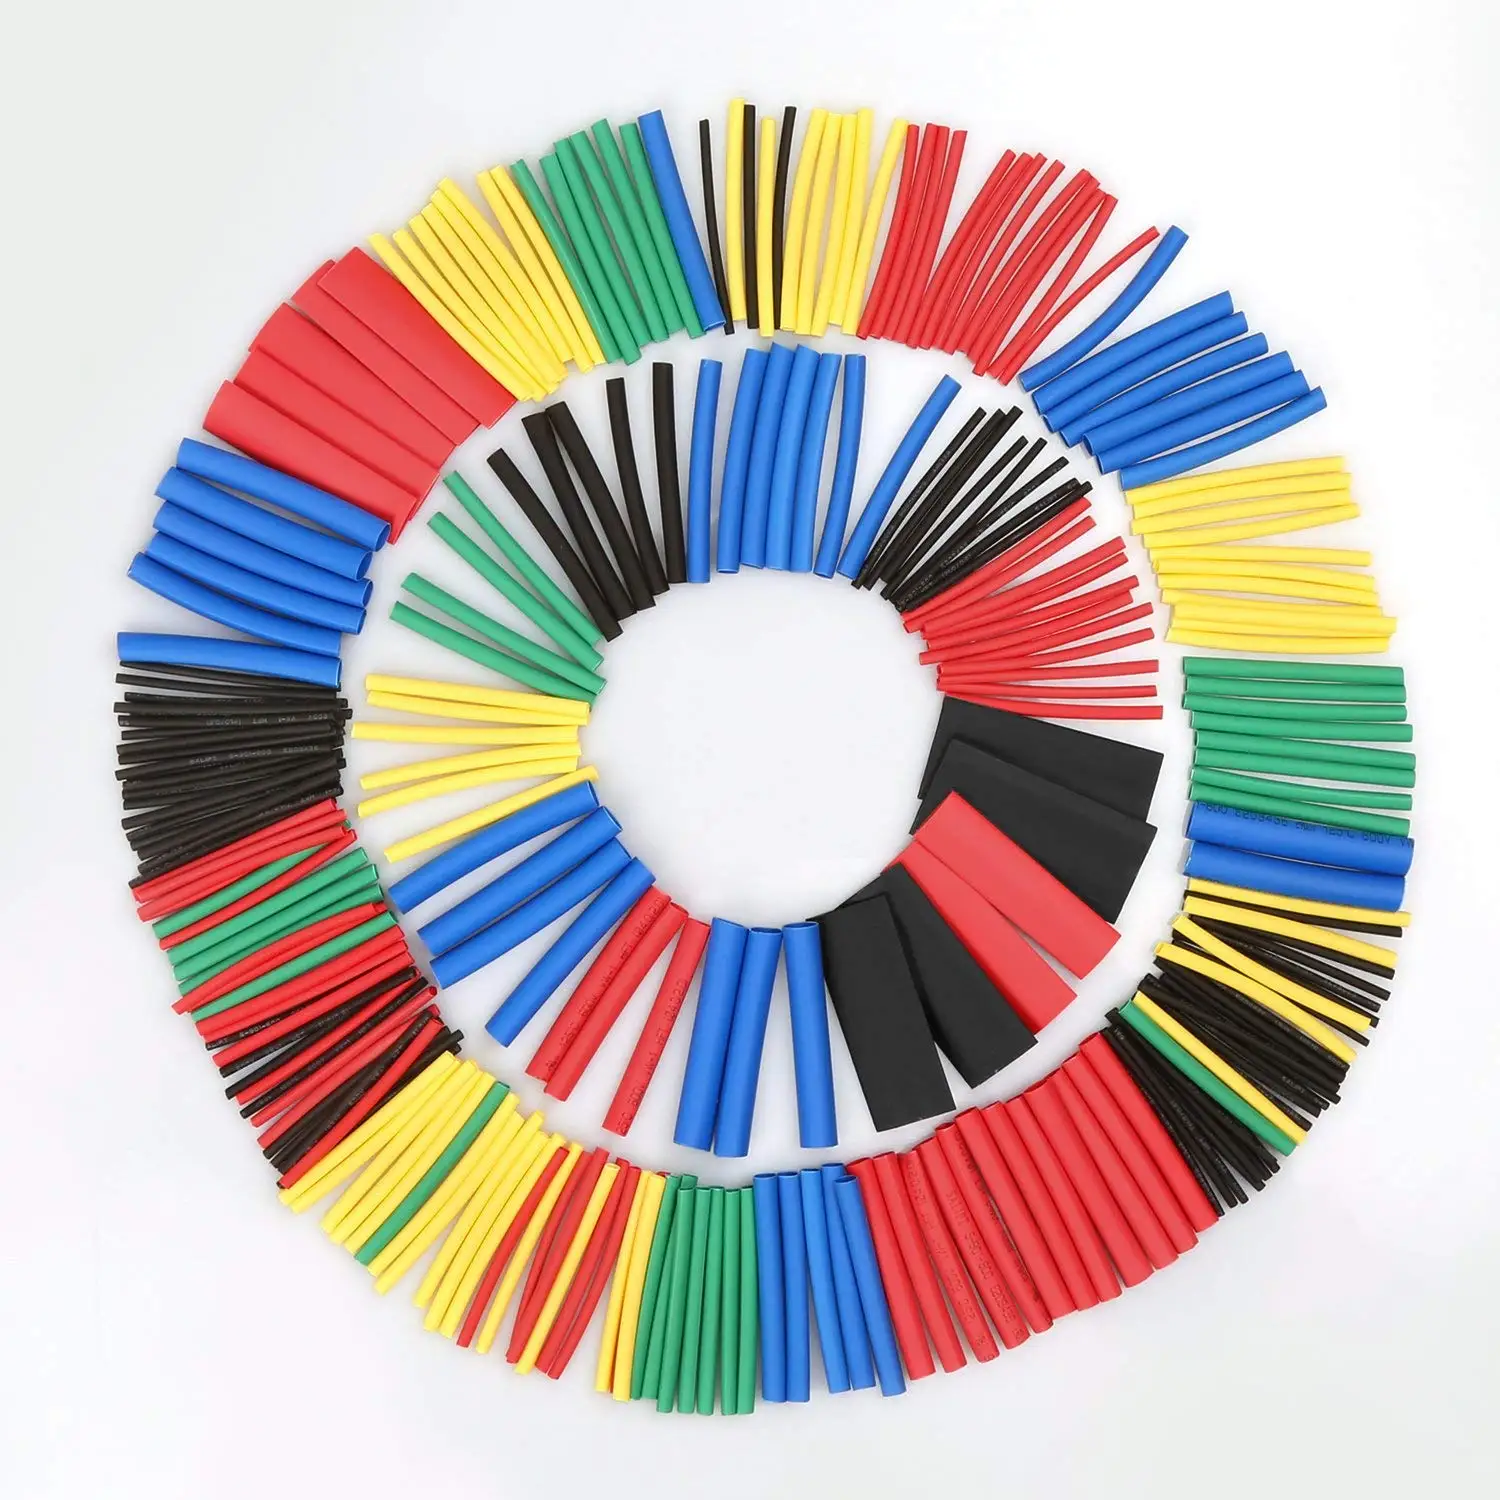 525pcs Heat Shrink Tubing 2:1 Eventronic Electrical Wire Cable Wrap Assortment Electric Insulation Heat Shrink Tube Kit with Box 5 colors/12 Sizes by woerhui 